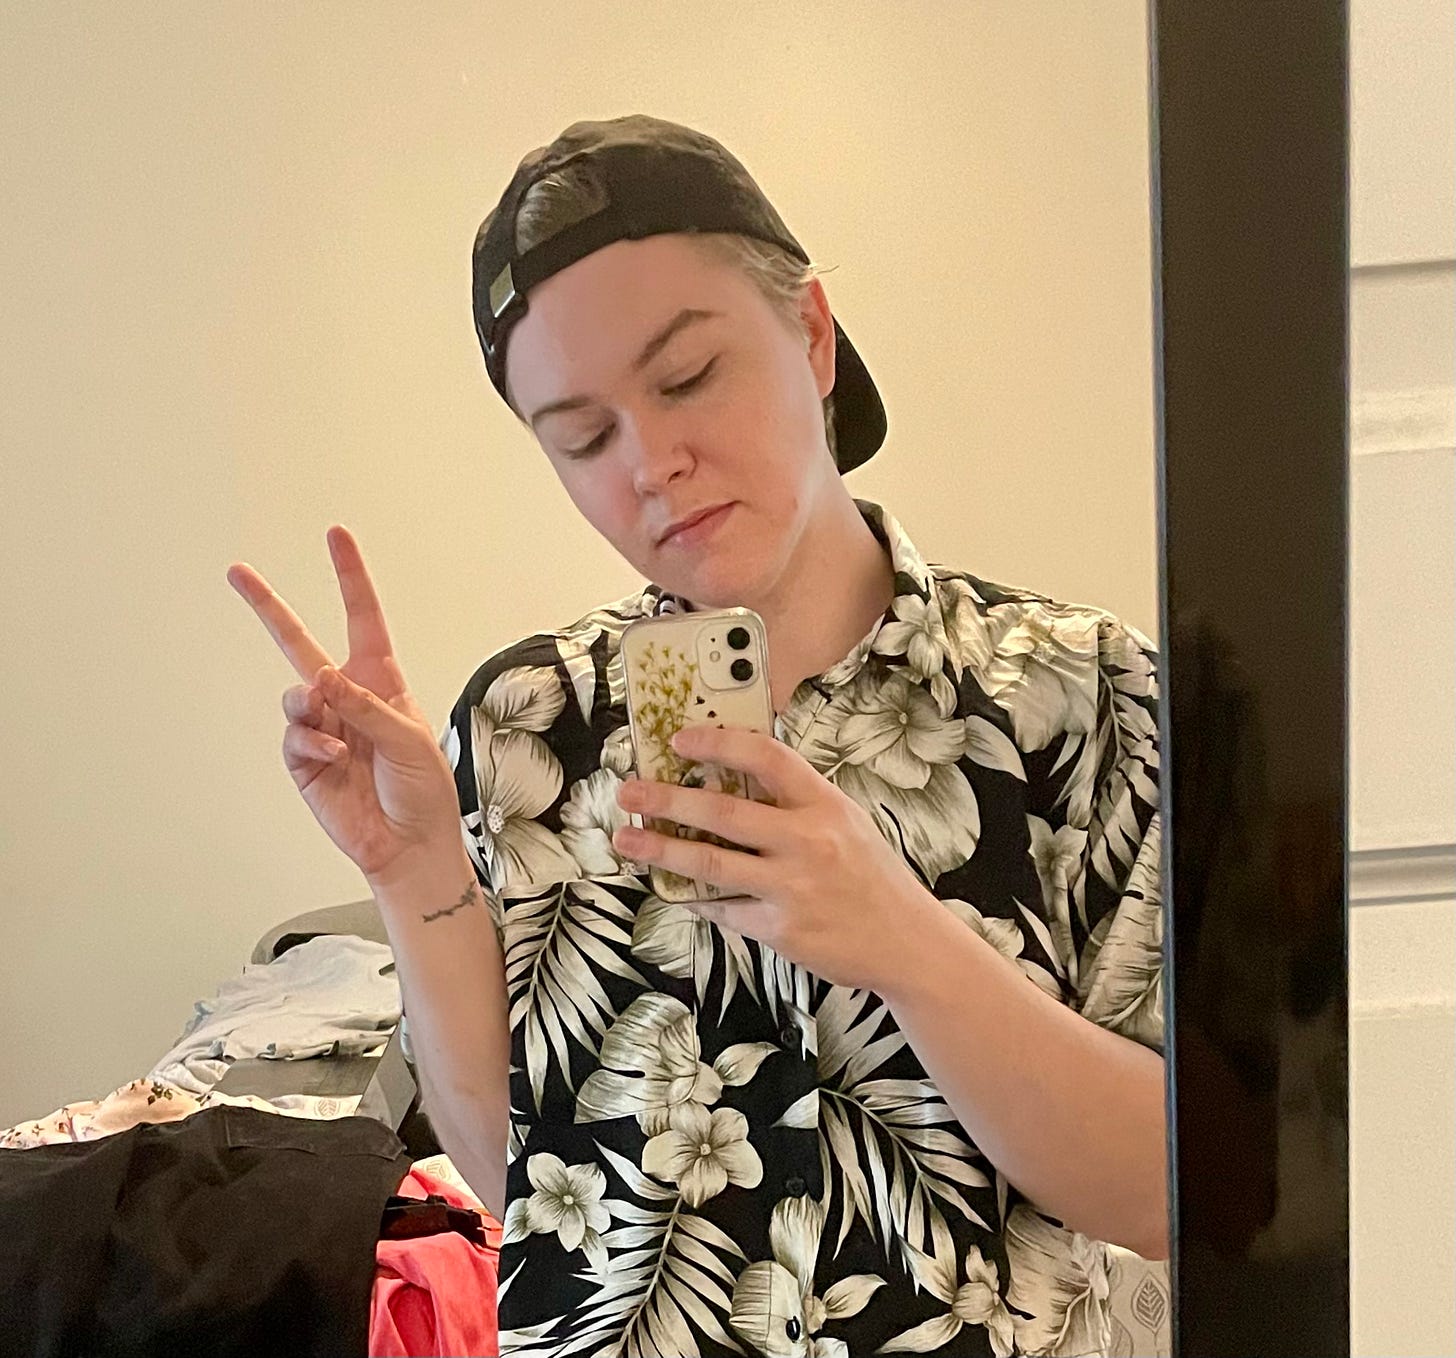 mick stands in front of a mirror taking a photo. they are wearing a black baseball cap backwards and a black and white Hawaiian shirt. they are holding up two fingers to make a peace sign.